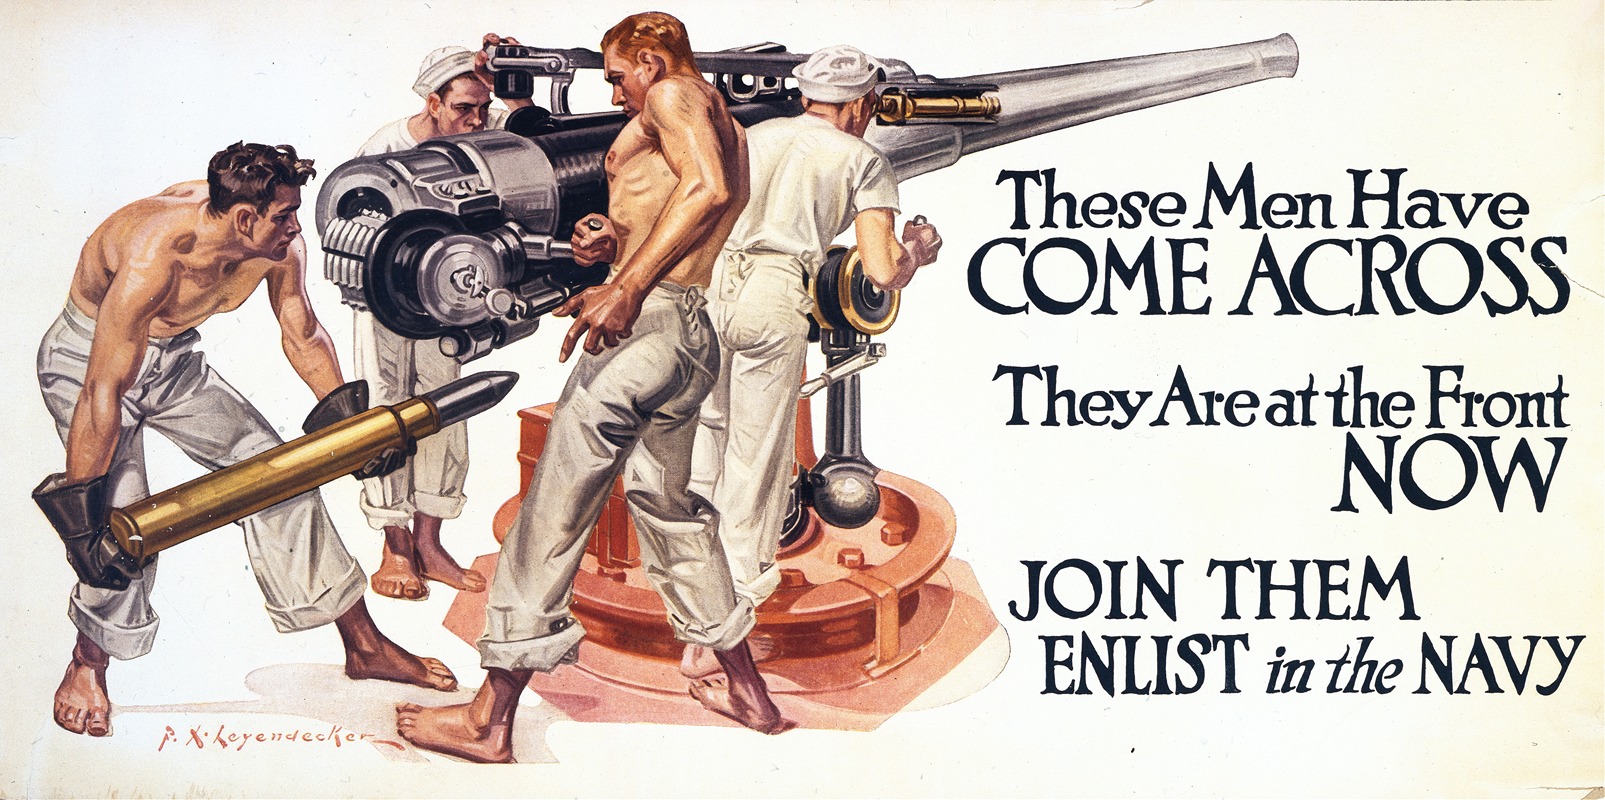 Frank Xavier Leyendecker - These men have come across, they are at the front now